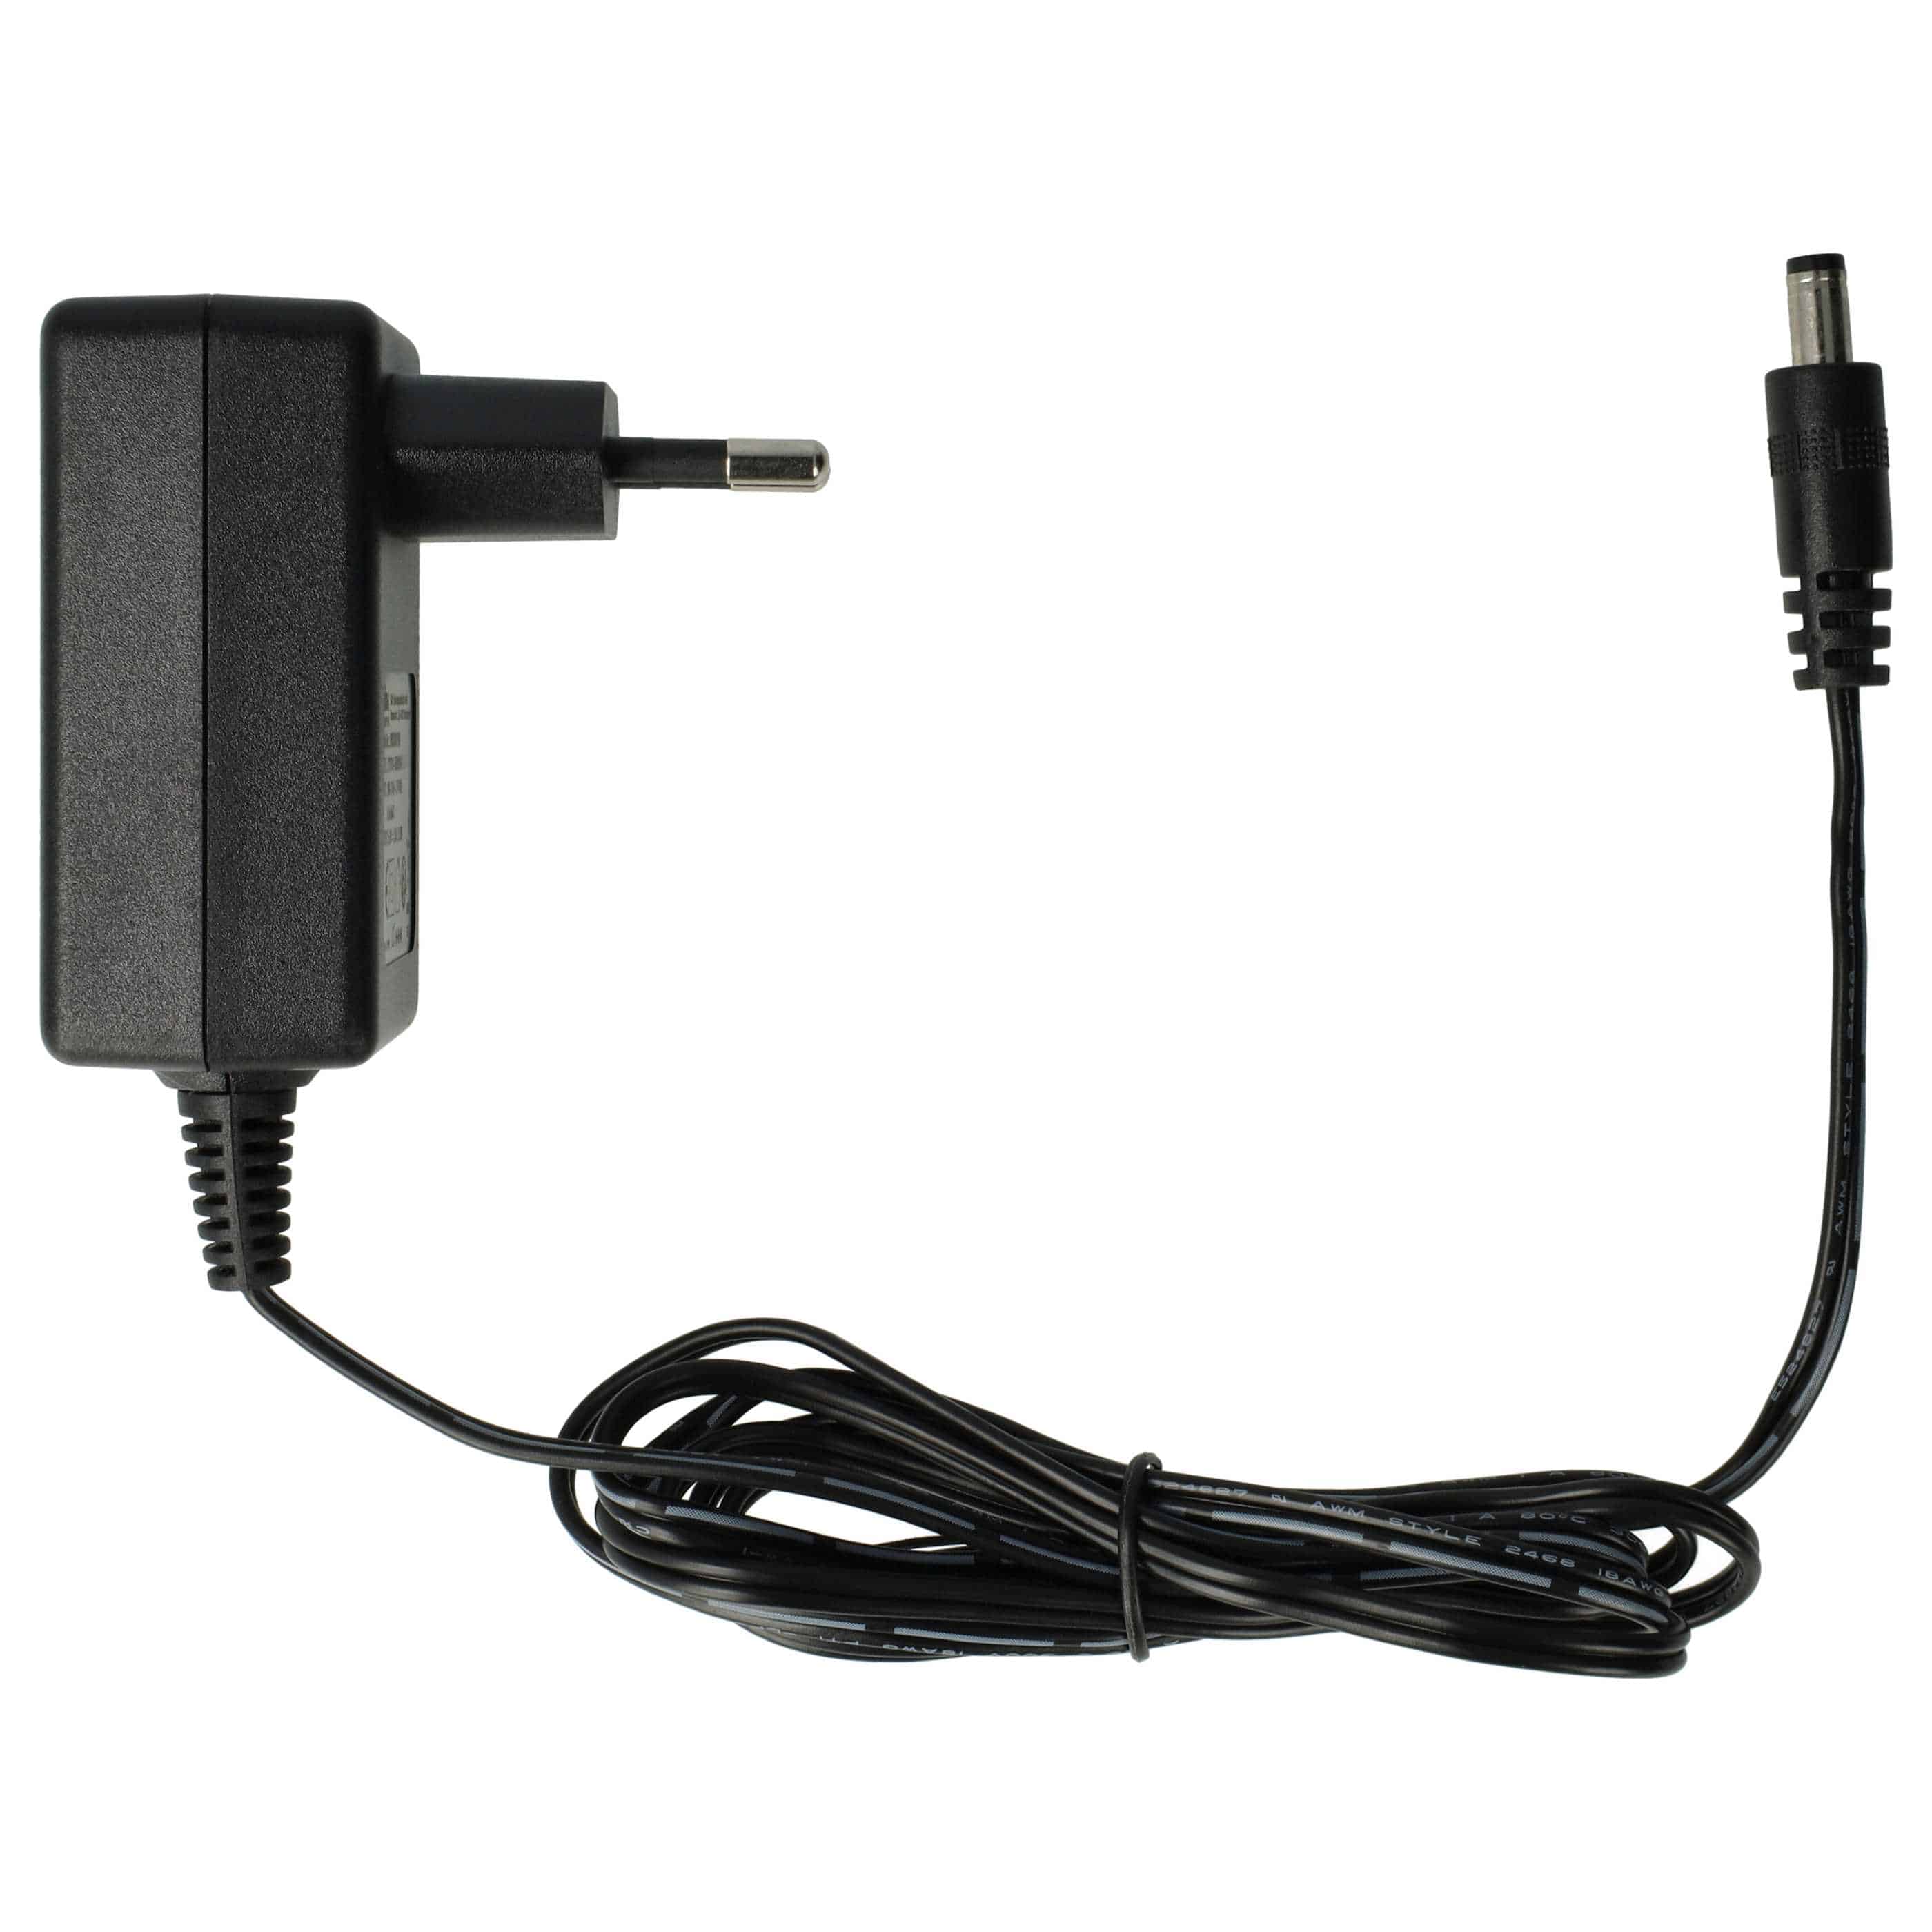 Mains Power Adapter replaces Poly 2200-48871-125 for Poly Landline Telephone, Home Telephone - 150 cm